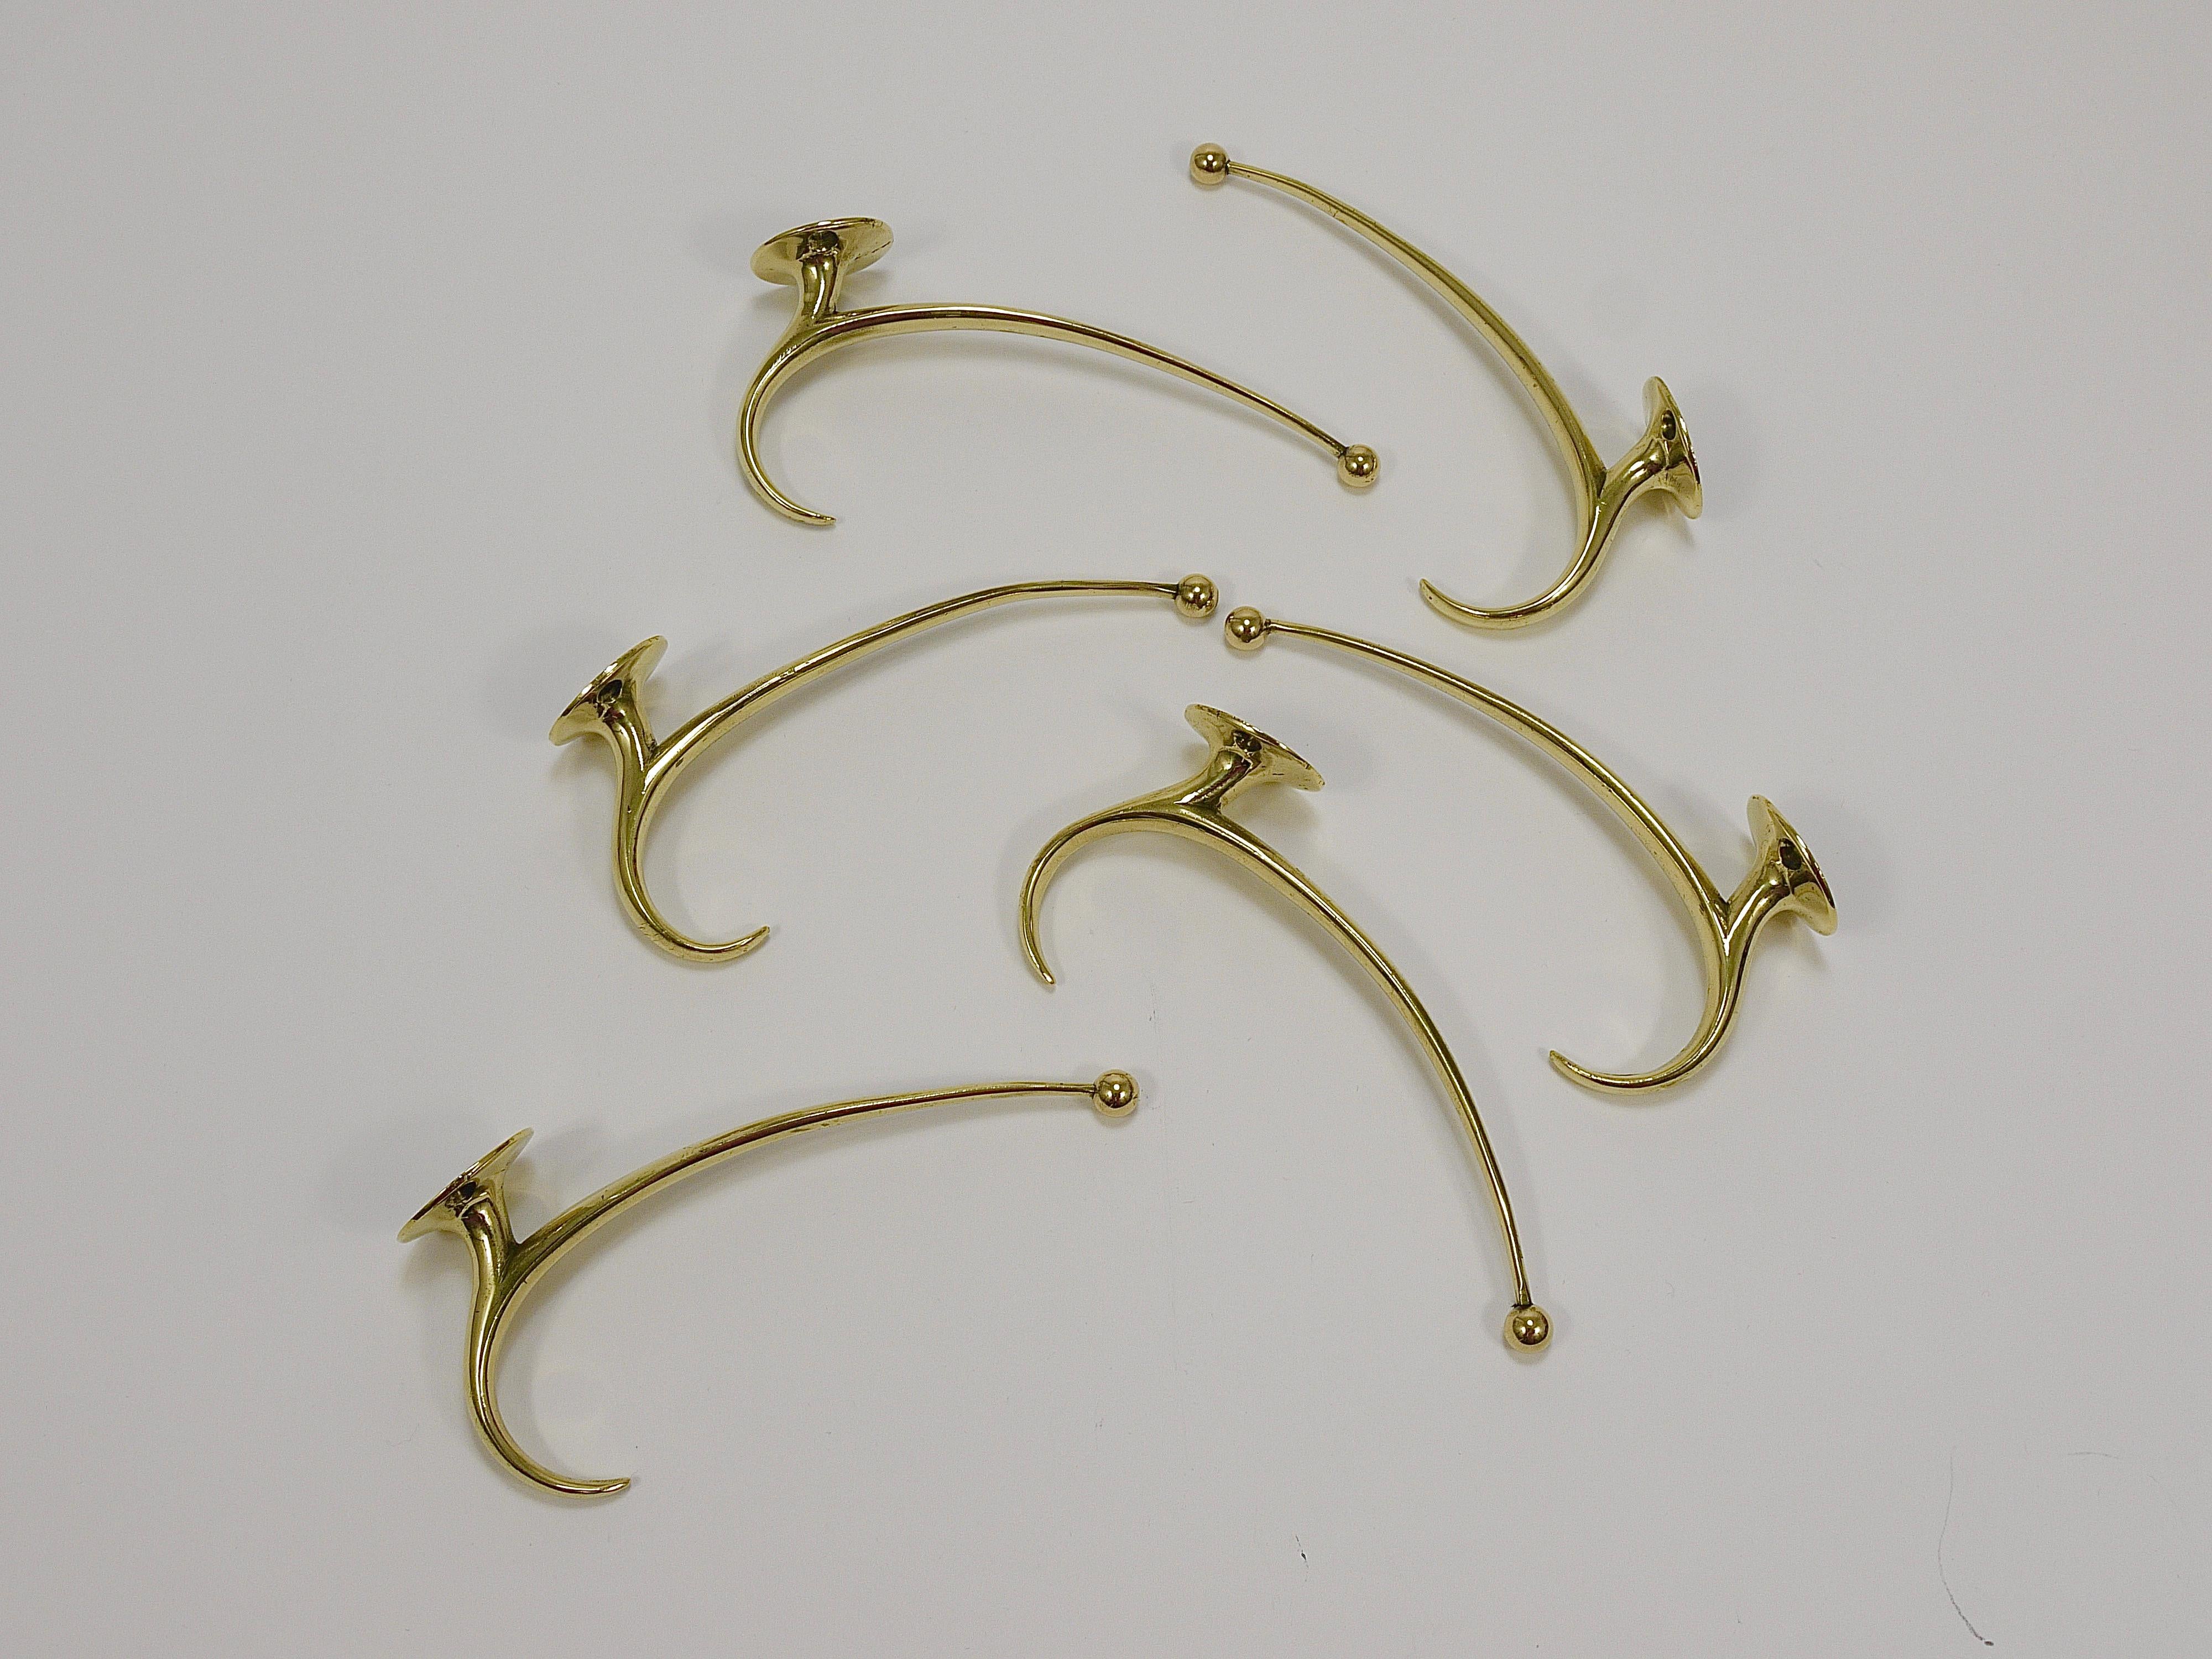 Six Franz Hagenauer Vienna Mid-Century Curved Brass Wall Coat Hooks, 1950s For Sale 5